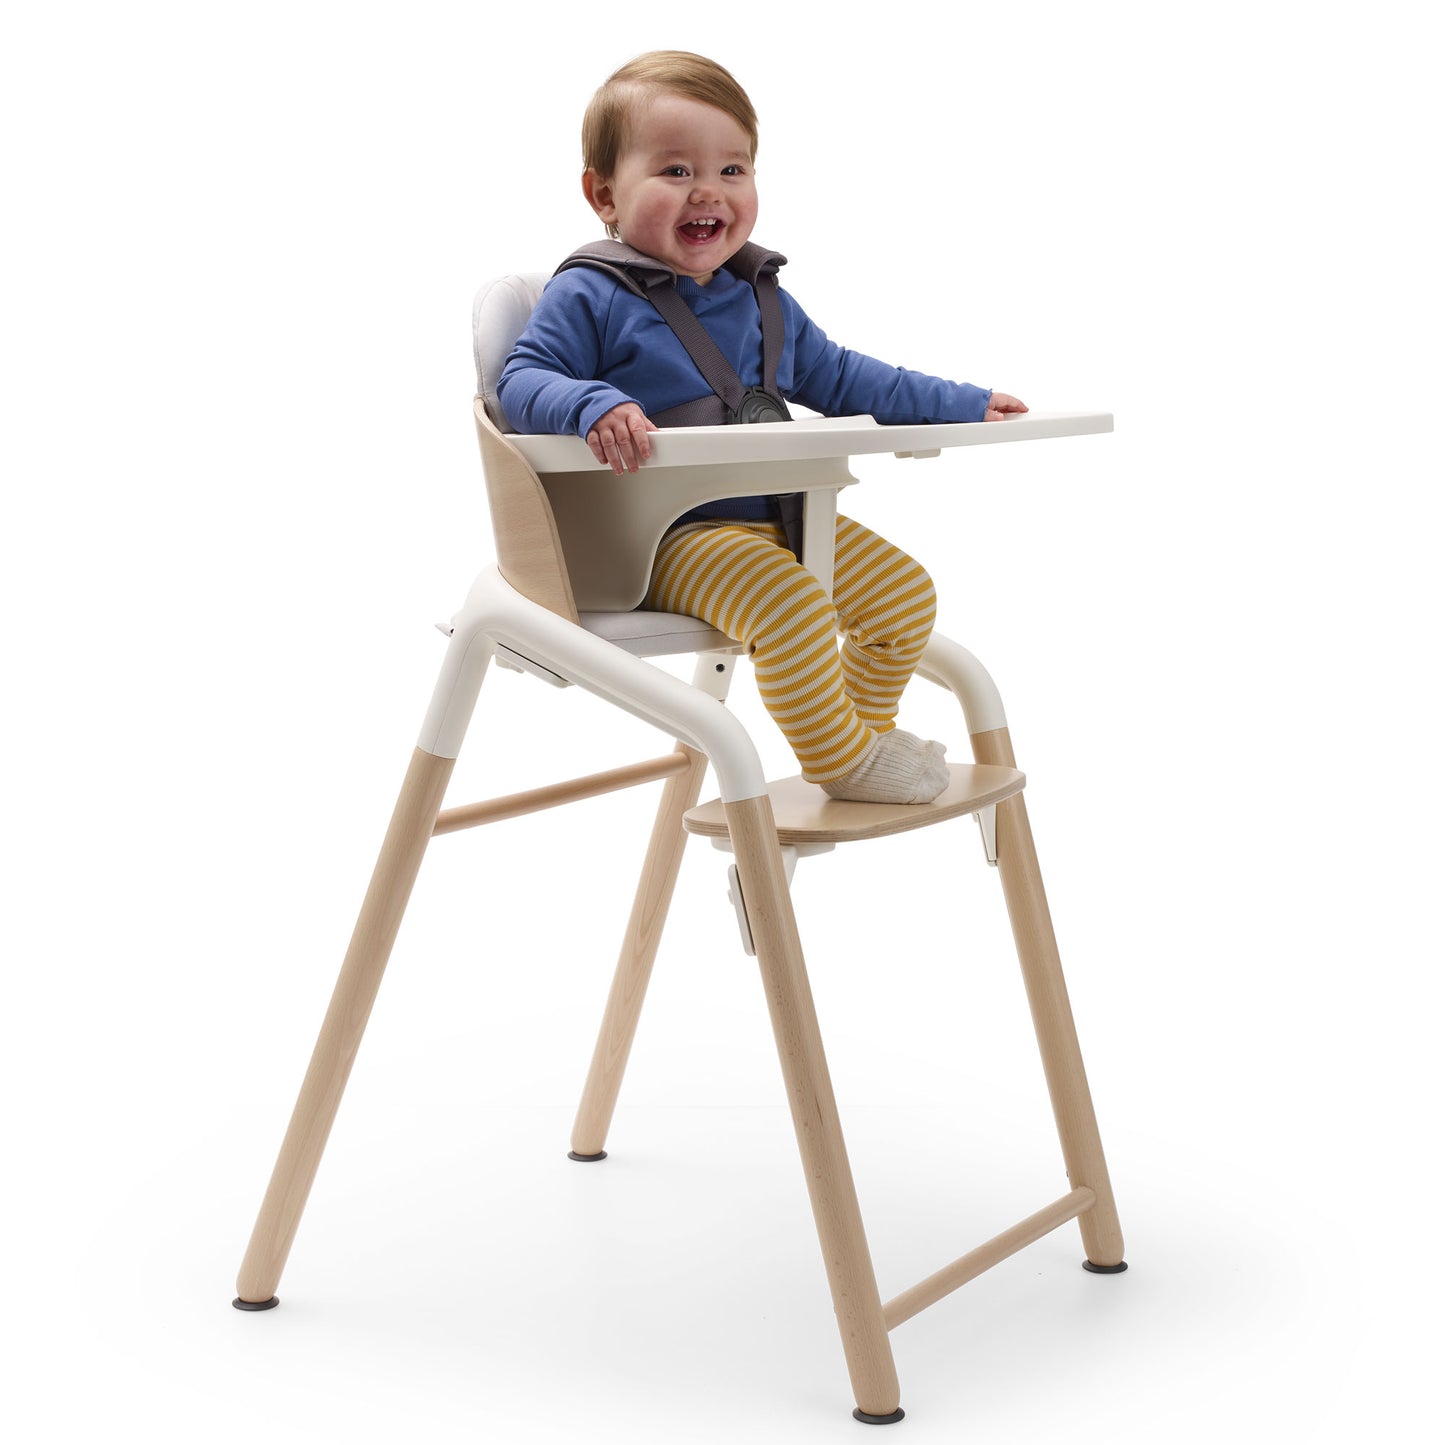 Baby sits in Bugaboo Giraffe High Chair Complete - Natural Wood/White